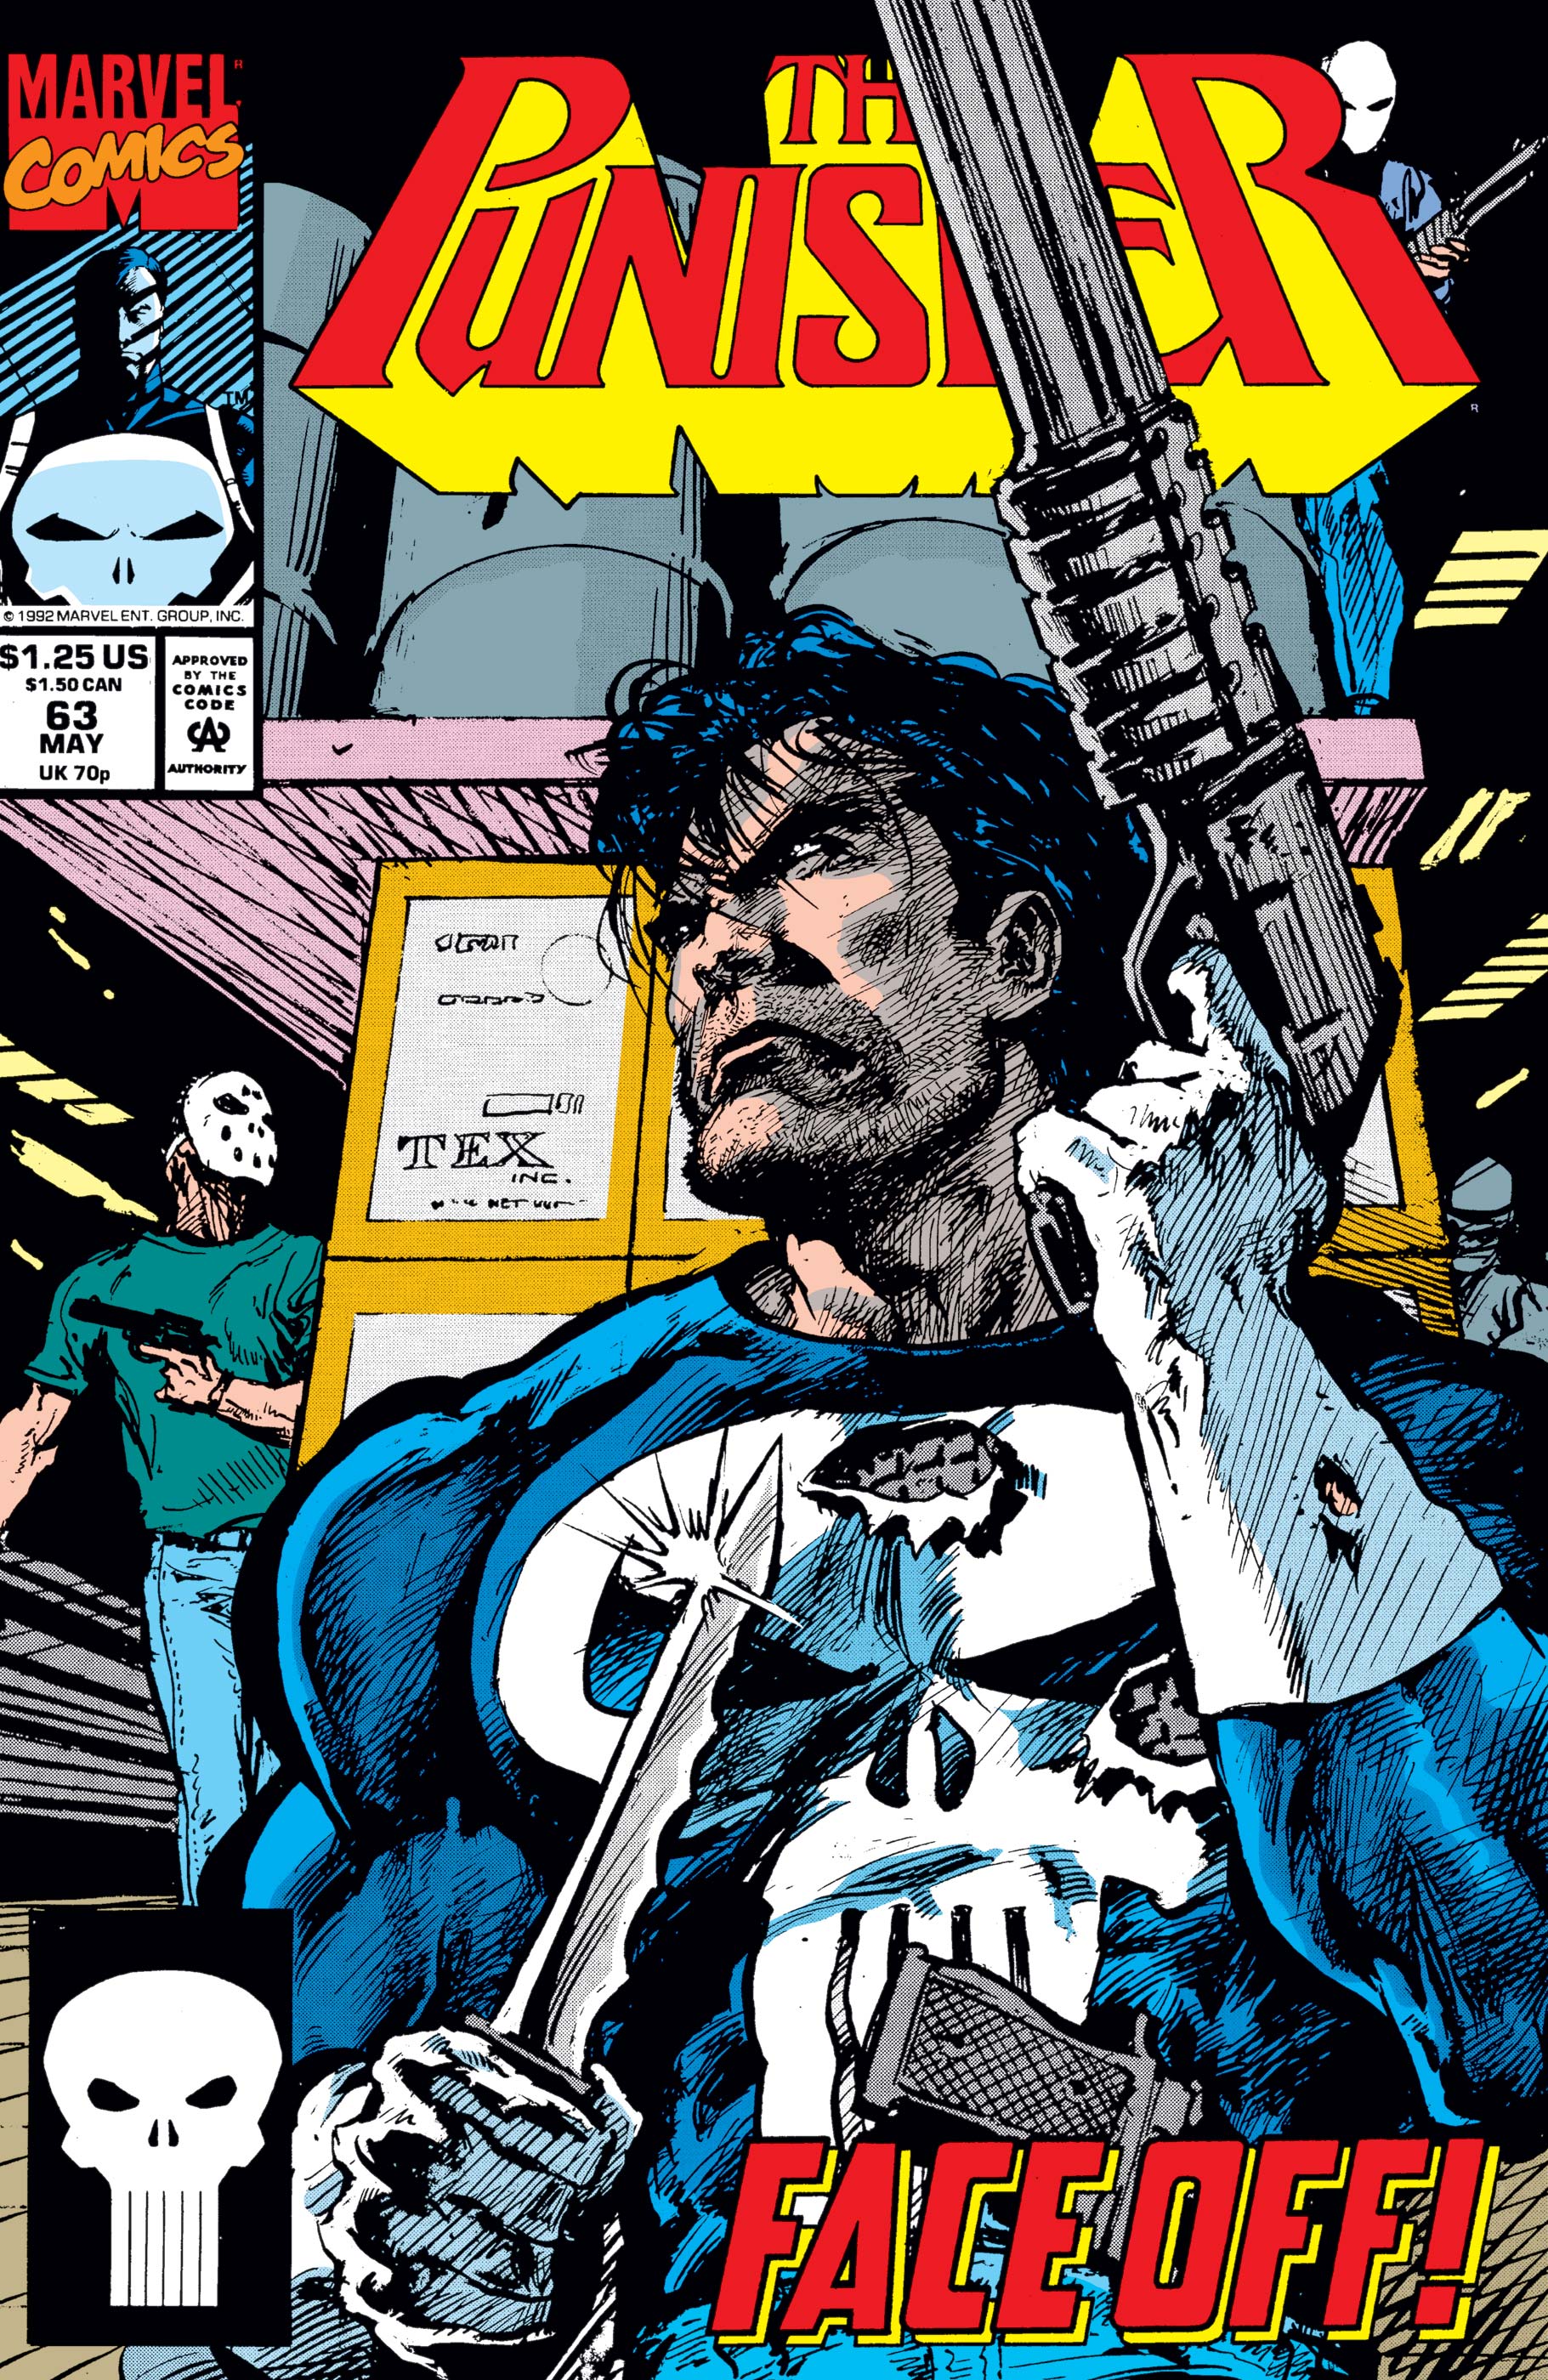 The Punisher (1987) #63